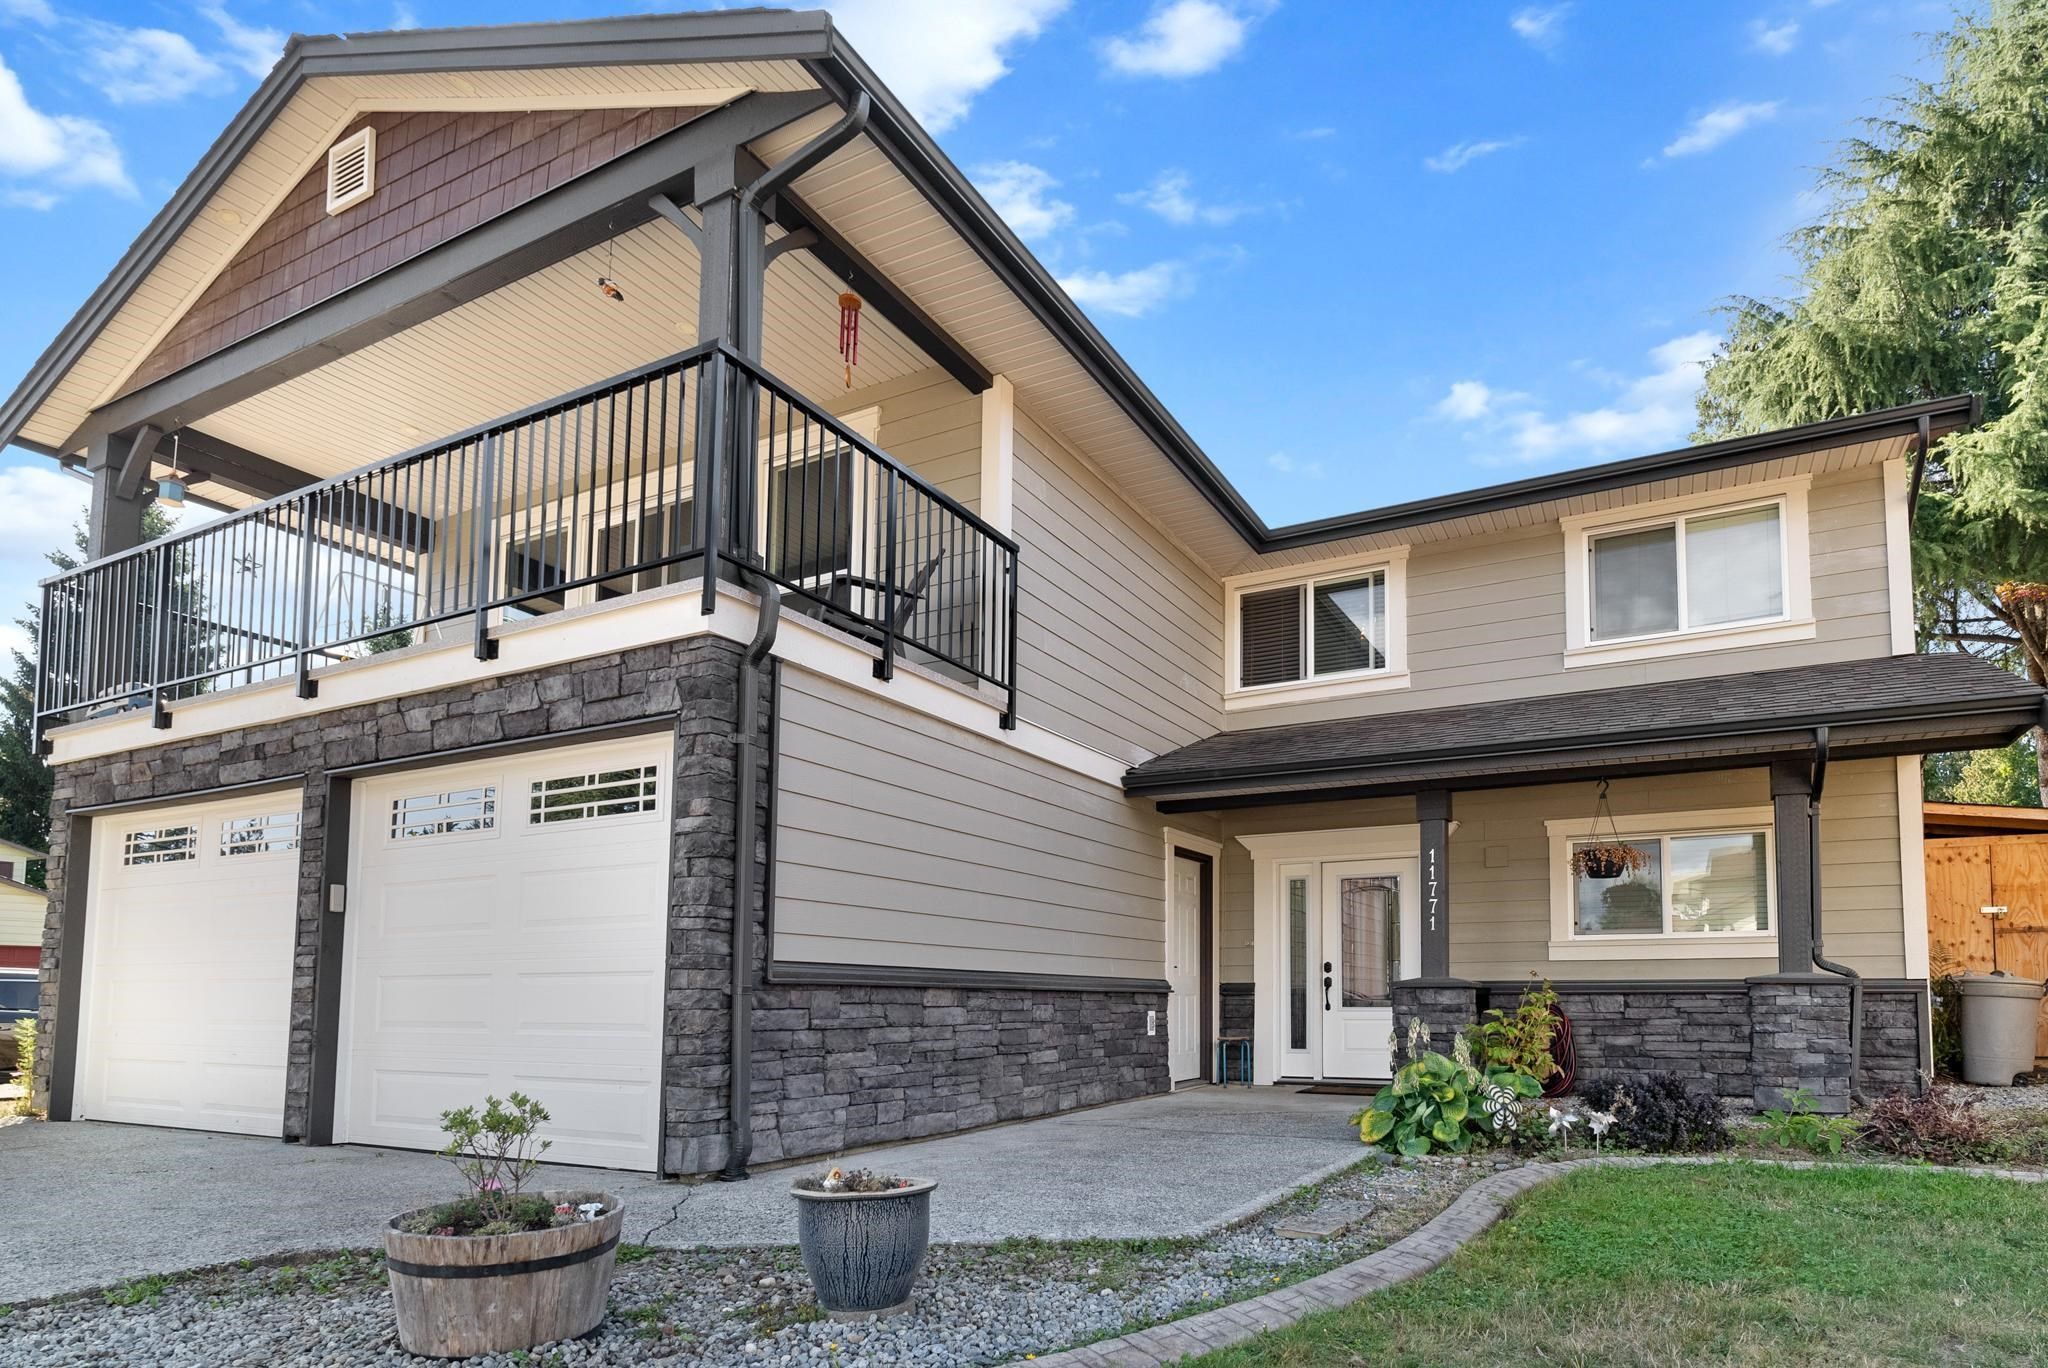 I have sold a property at 11771 212 ST in Maple Ridge
